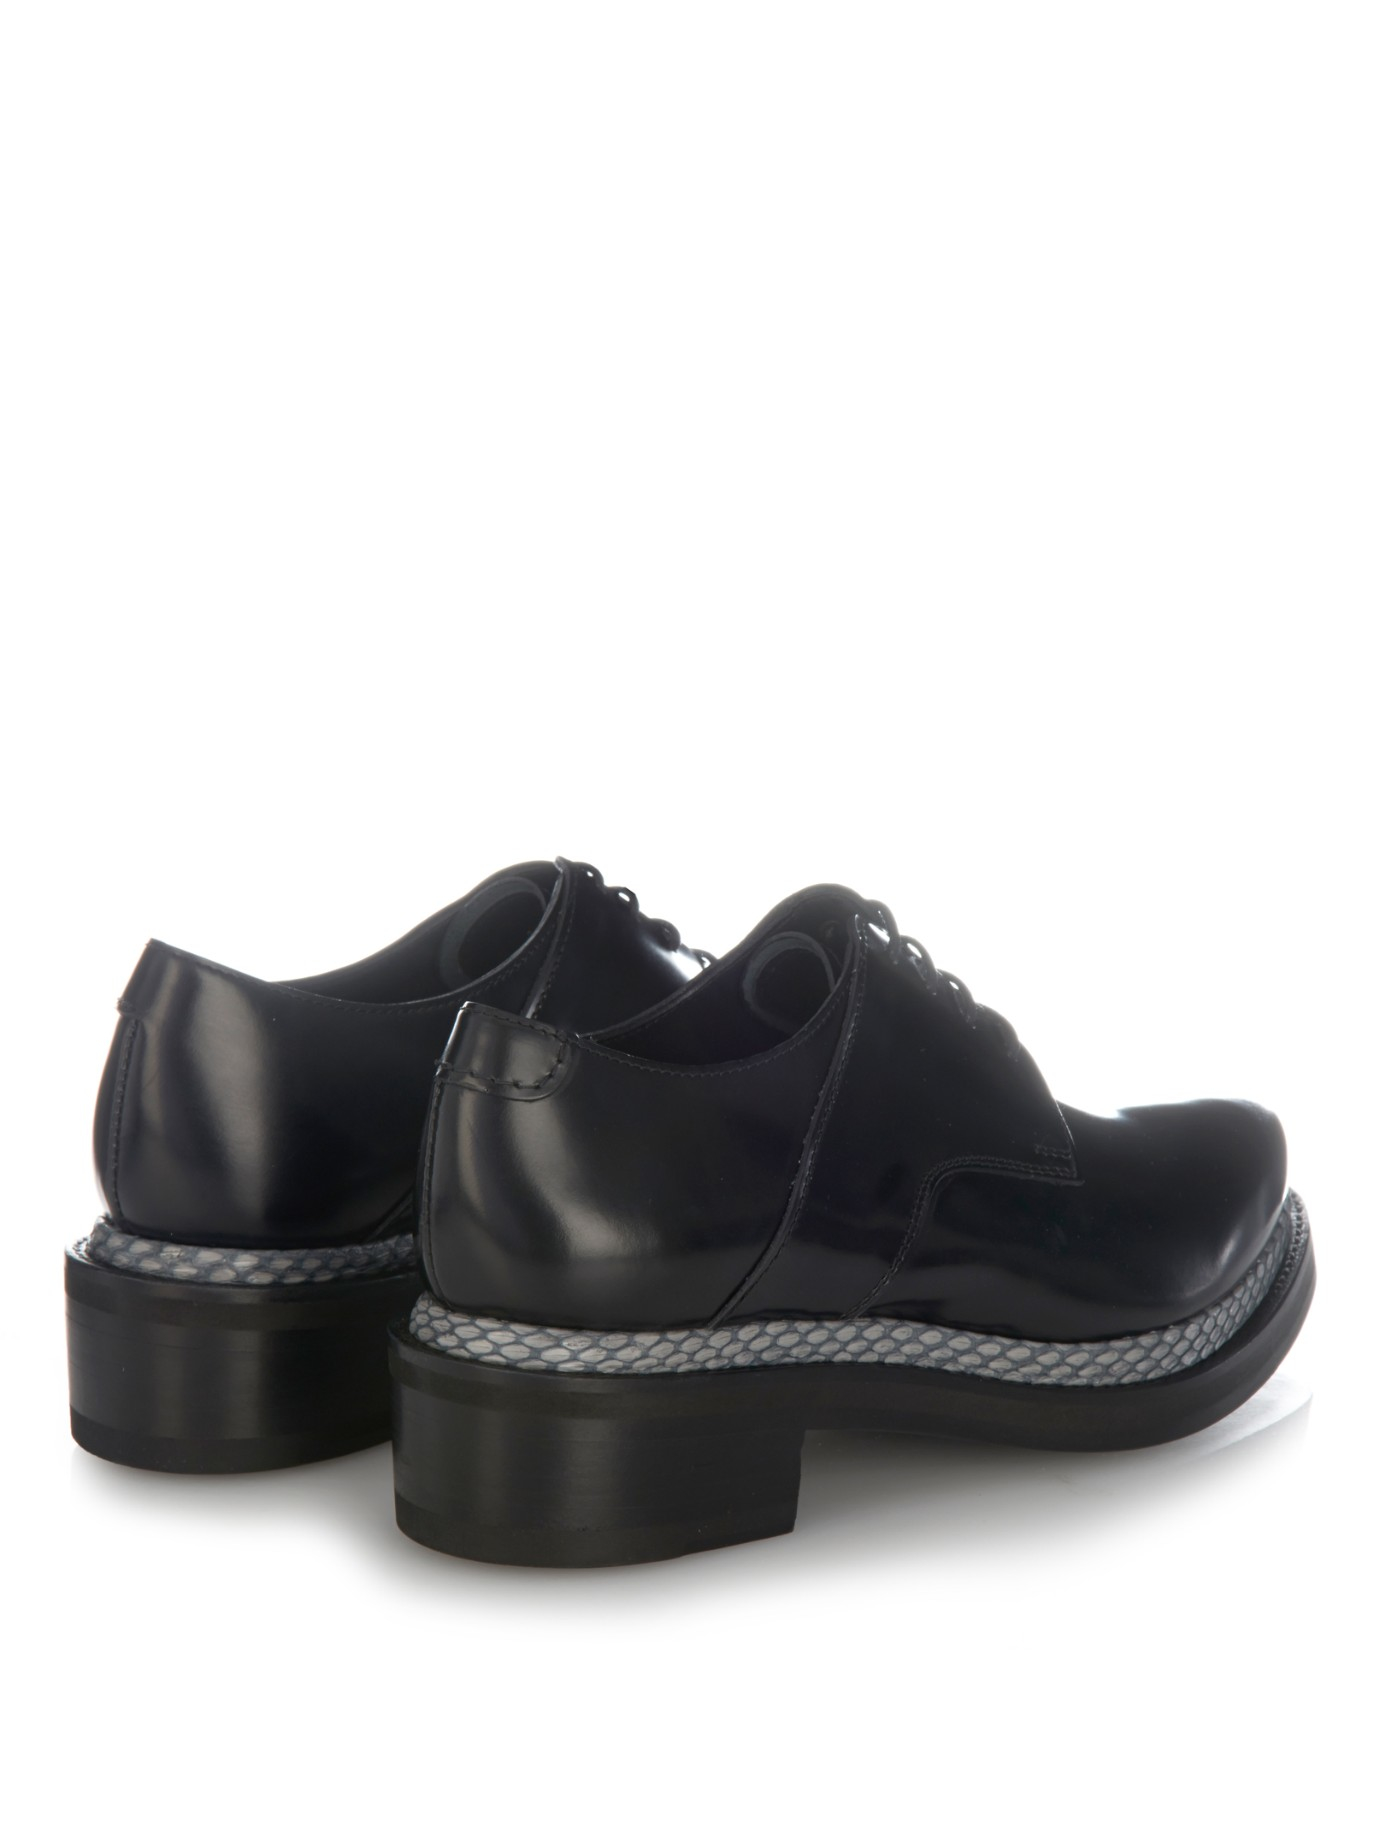 Lyst - Acne Studios Lark Snake Con Lace-Up Shoes in Black